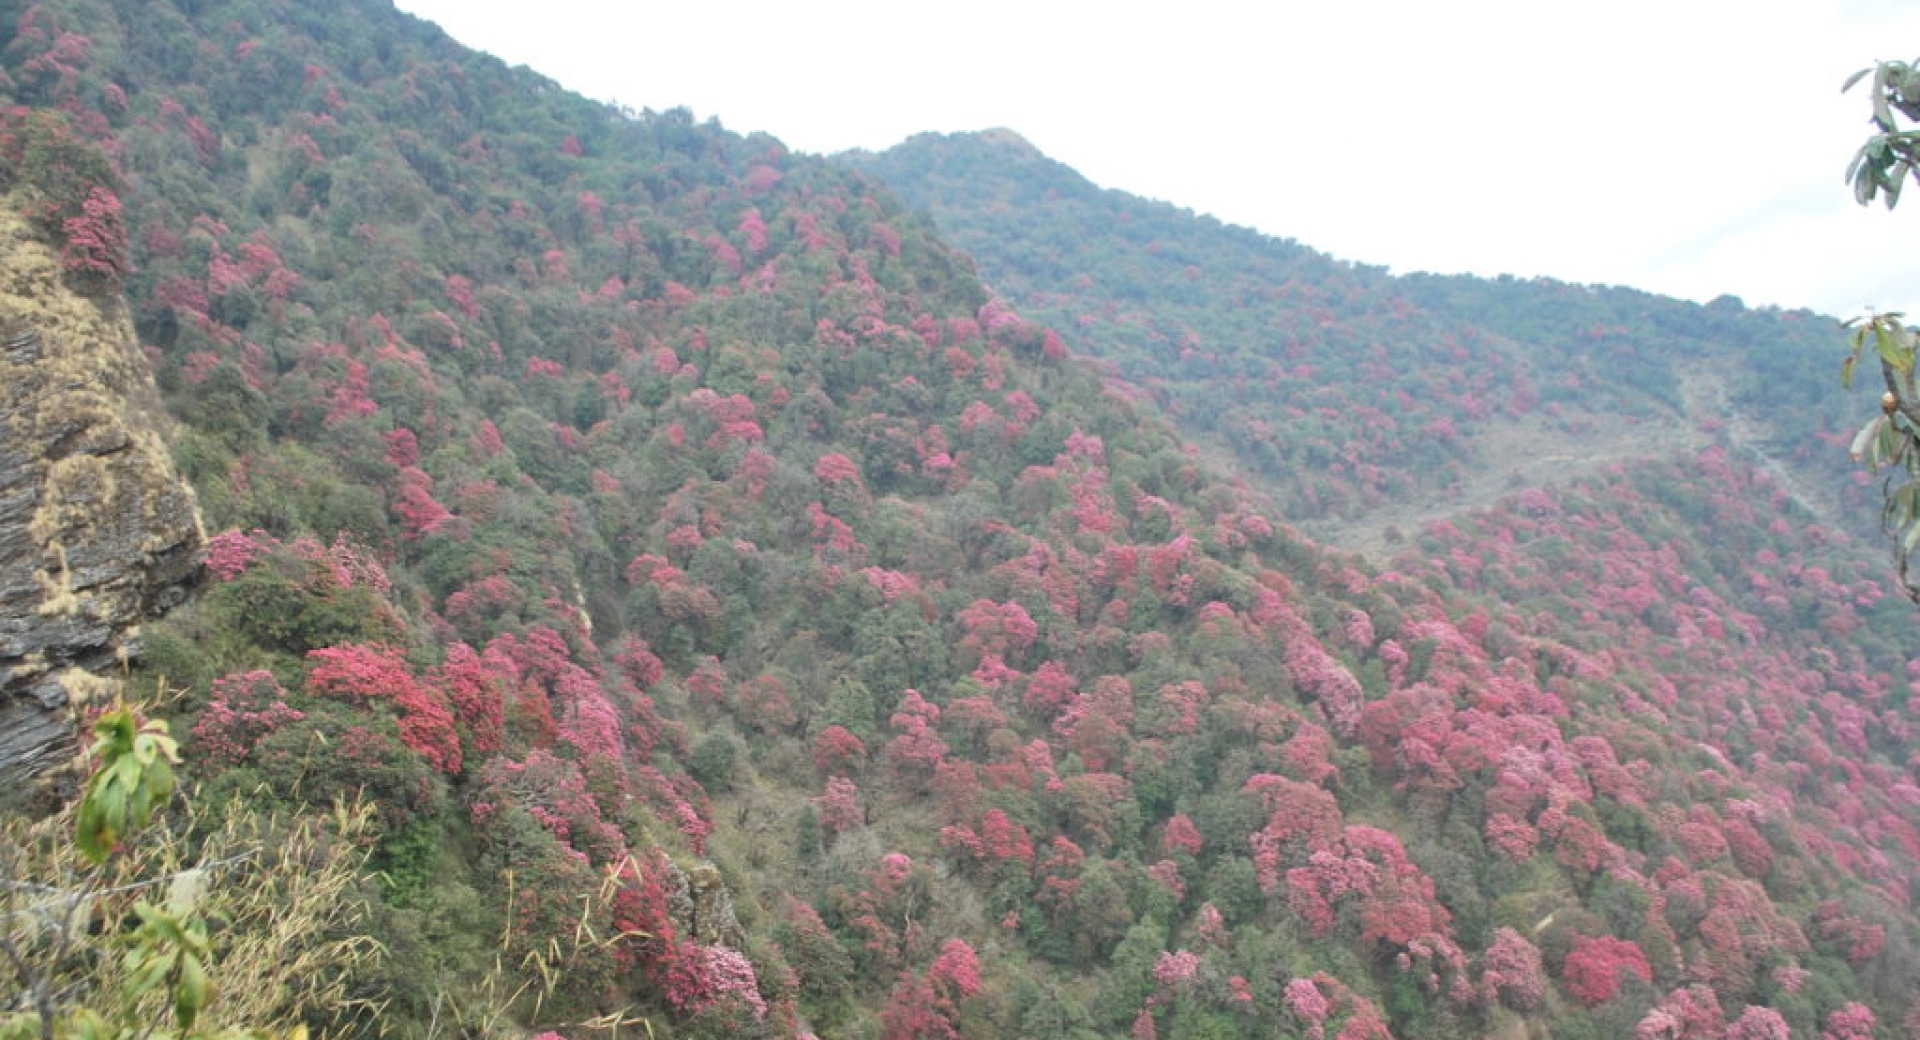 Land purchase and forest restoration to conserve the Endangered red panda in Nepal